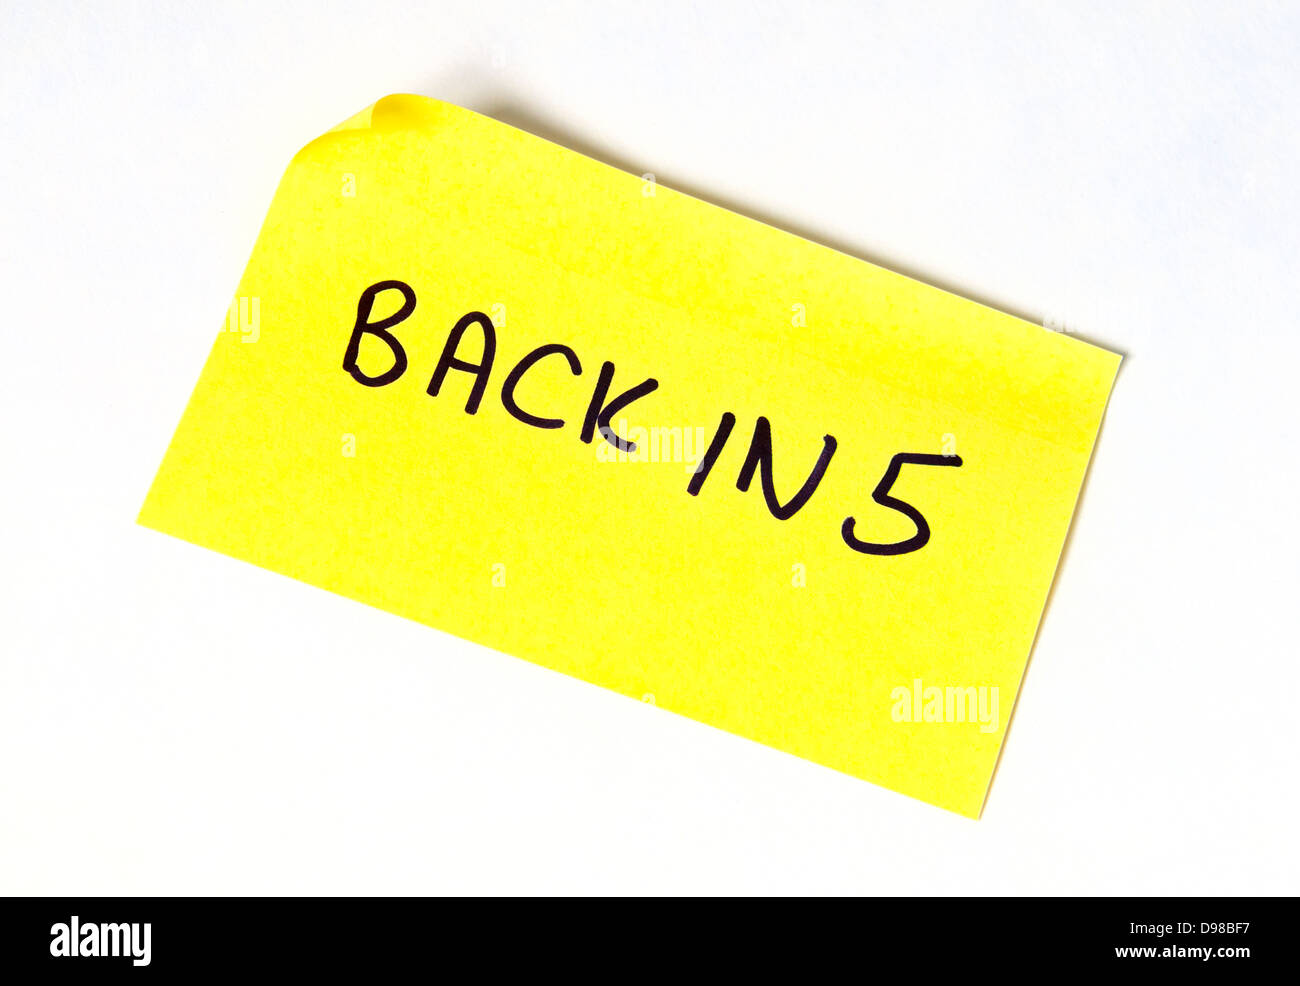 Back in 5 written on a yellow post it note Stock Photo